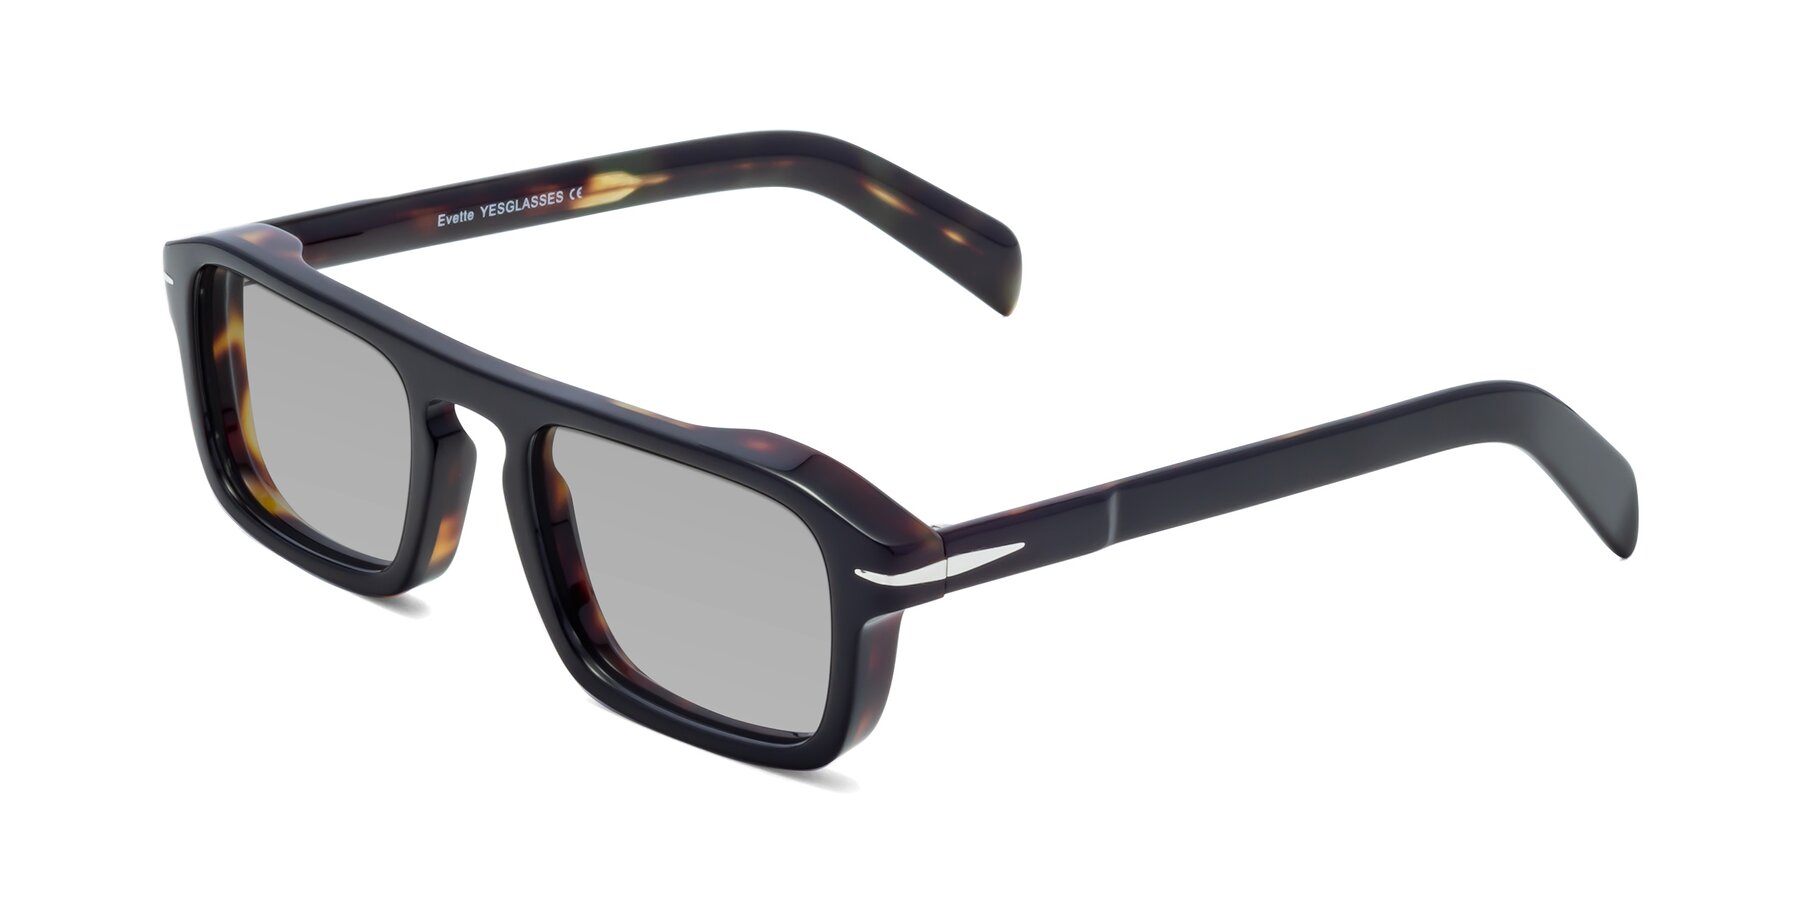 Angle of Evette in Black-Tortoise with Light Gray Tinted Lenses